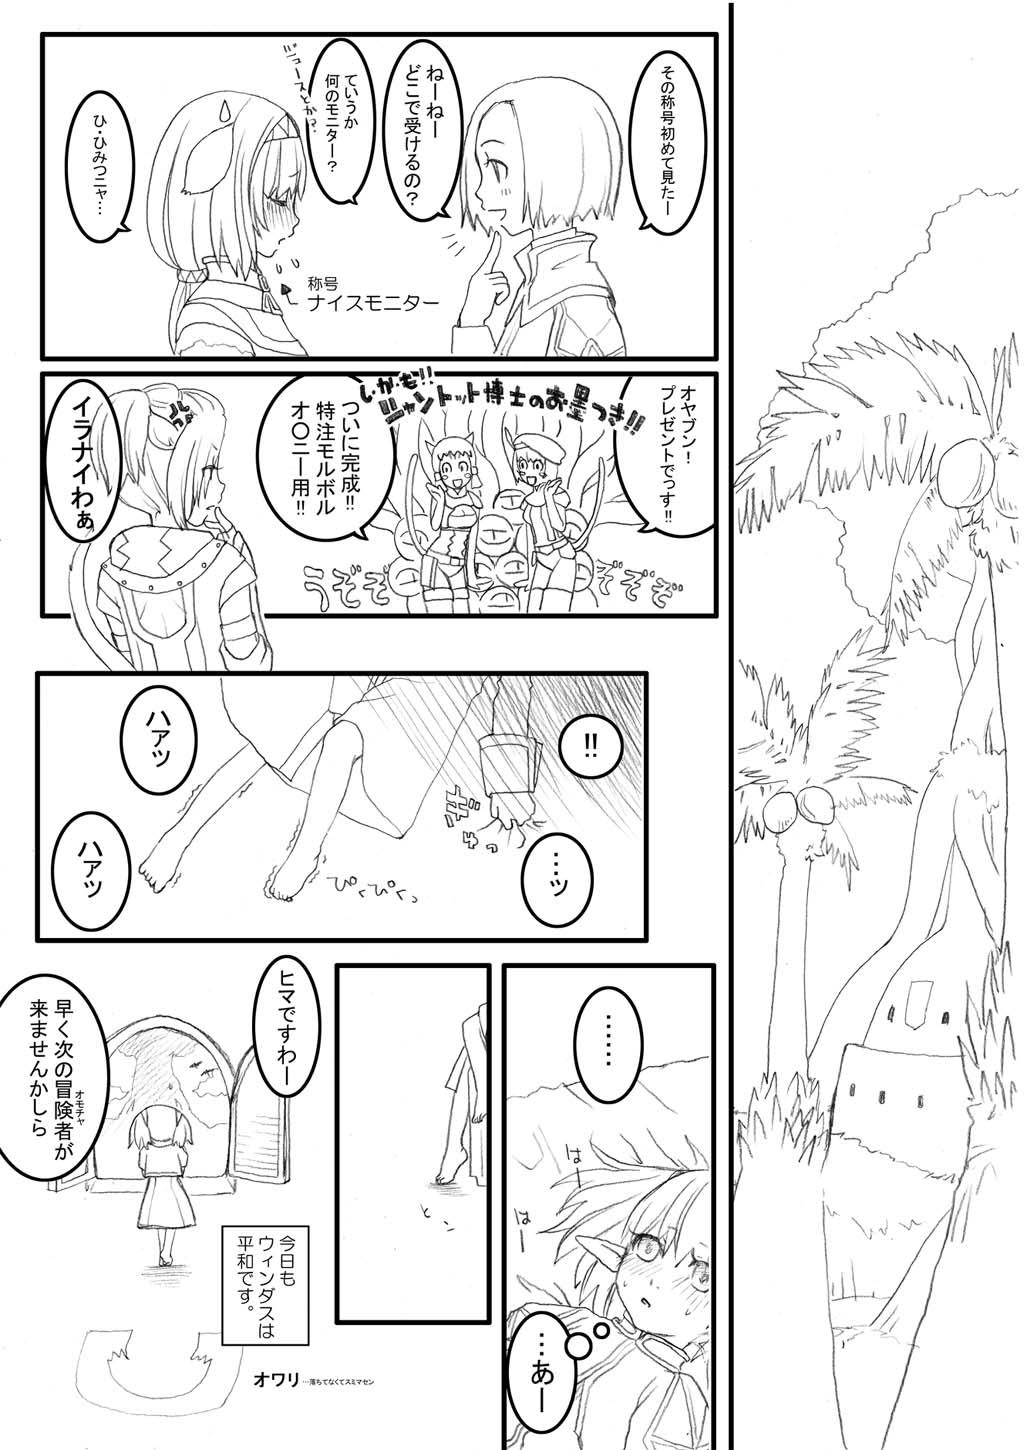 Ball Busting あれ - Final fantasy xi Leather - Page 6